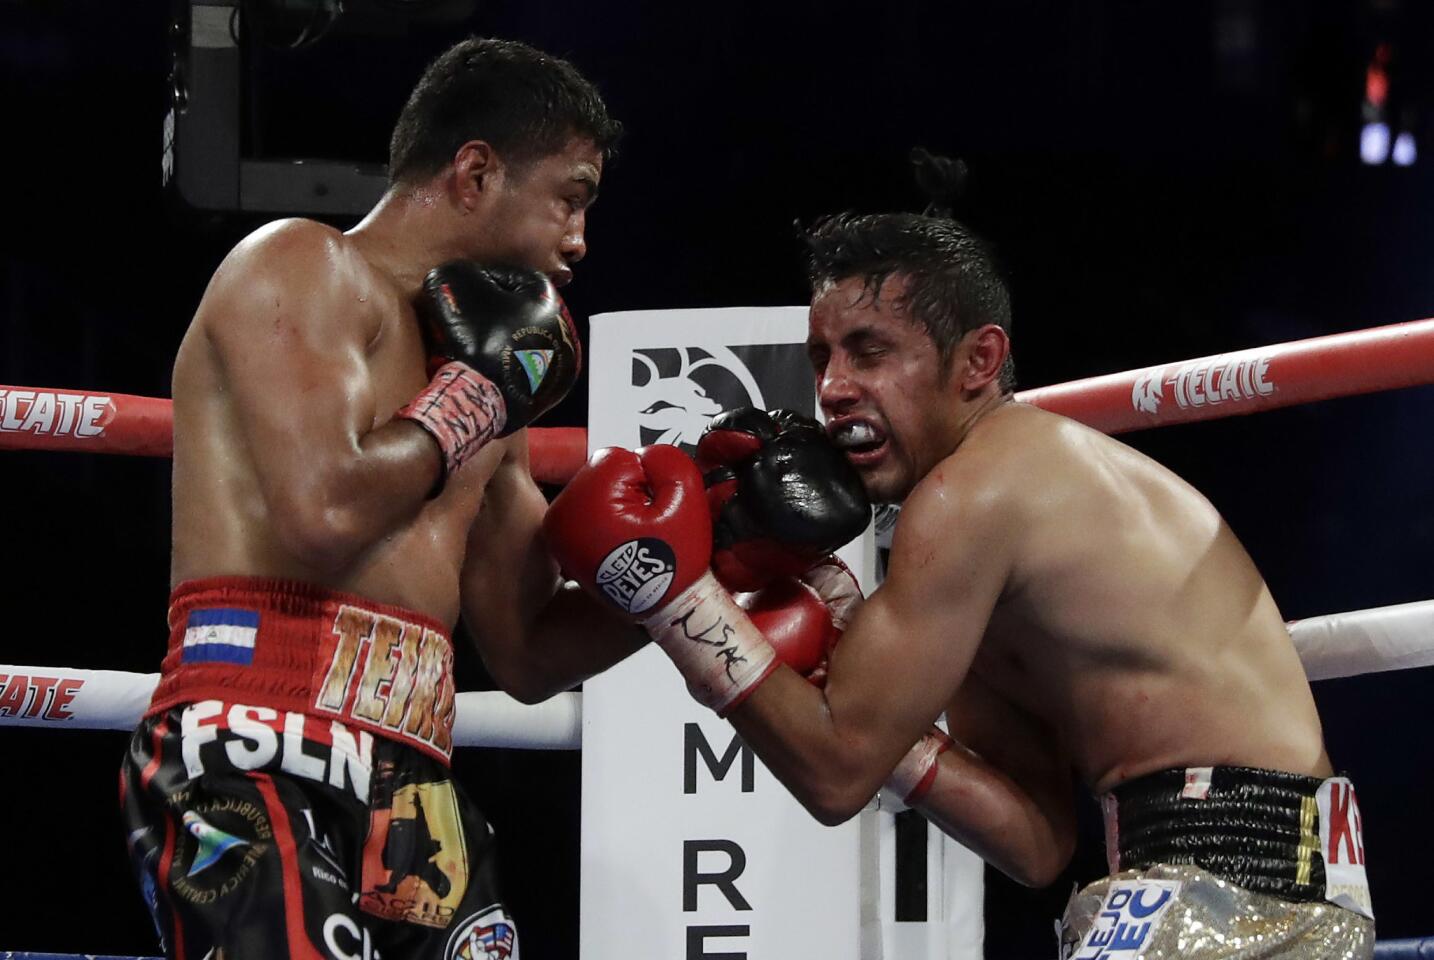 Roman Gonzalez, left, punches Moises Fuentes during their bantamweight boxing match, Saturday, Sept. 15, 2018, in Las Vegas. Gonzalez won by TKO.